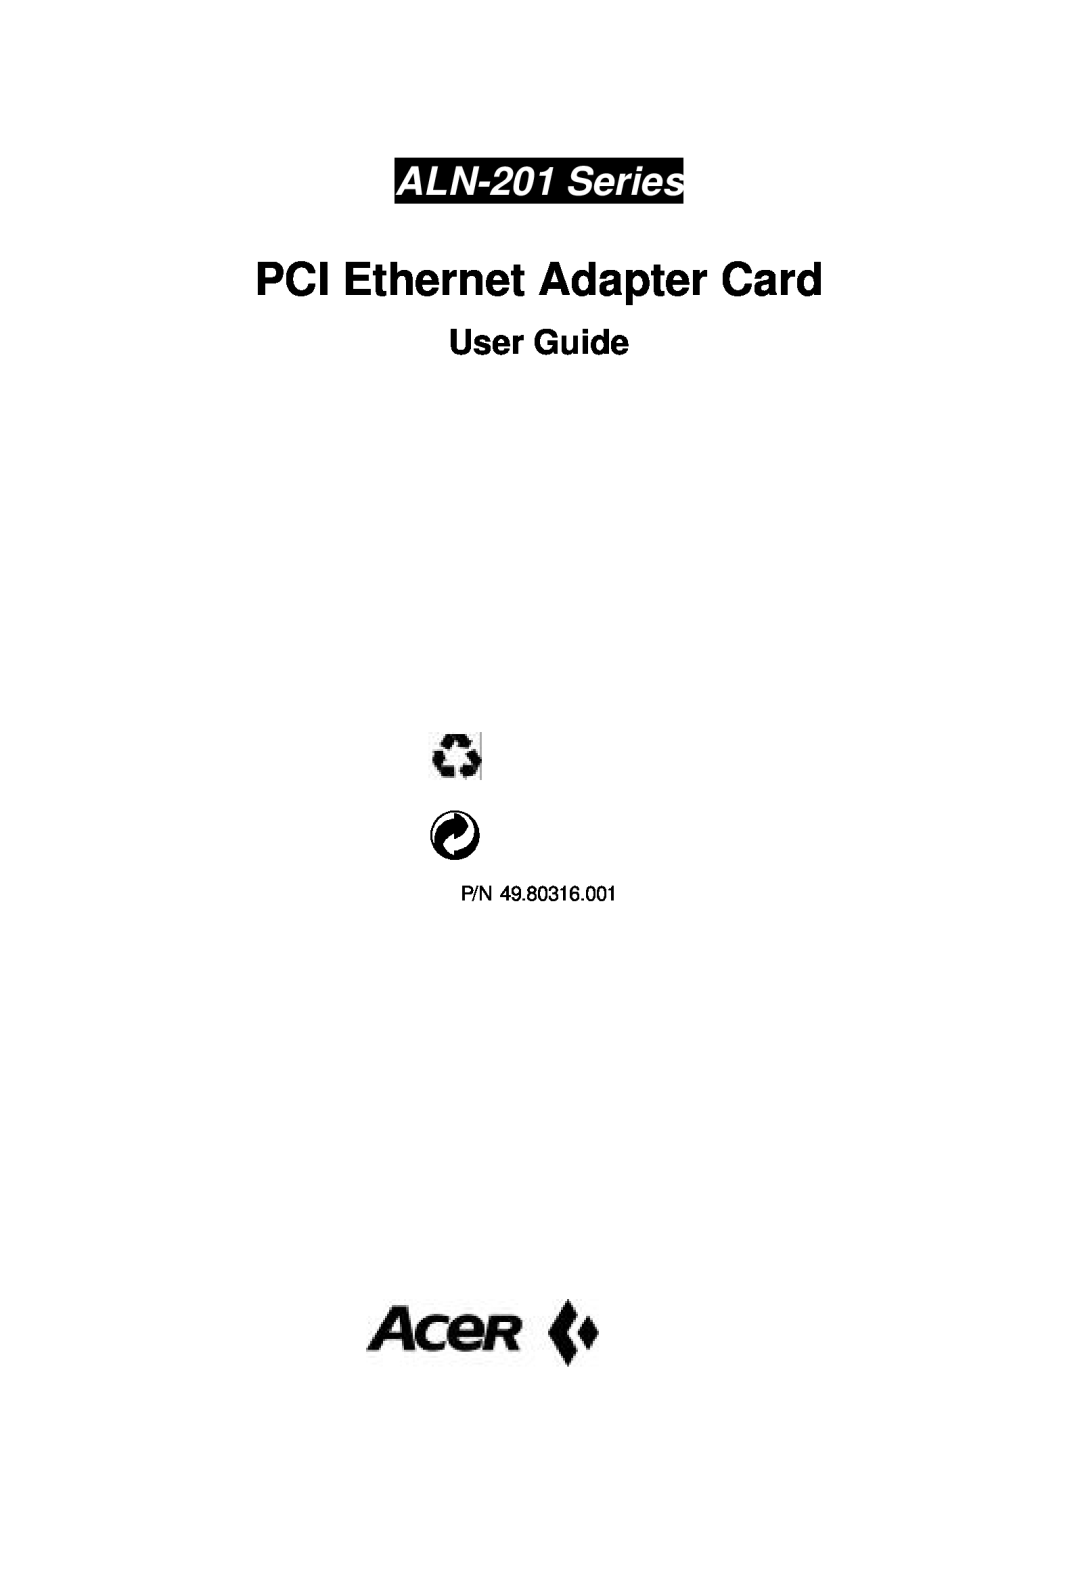 Acer manual User Guide, PCI Ethernet Adapter Card, ALN-201 Series 